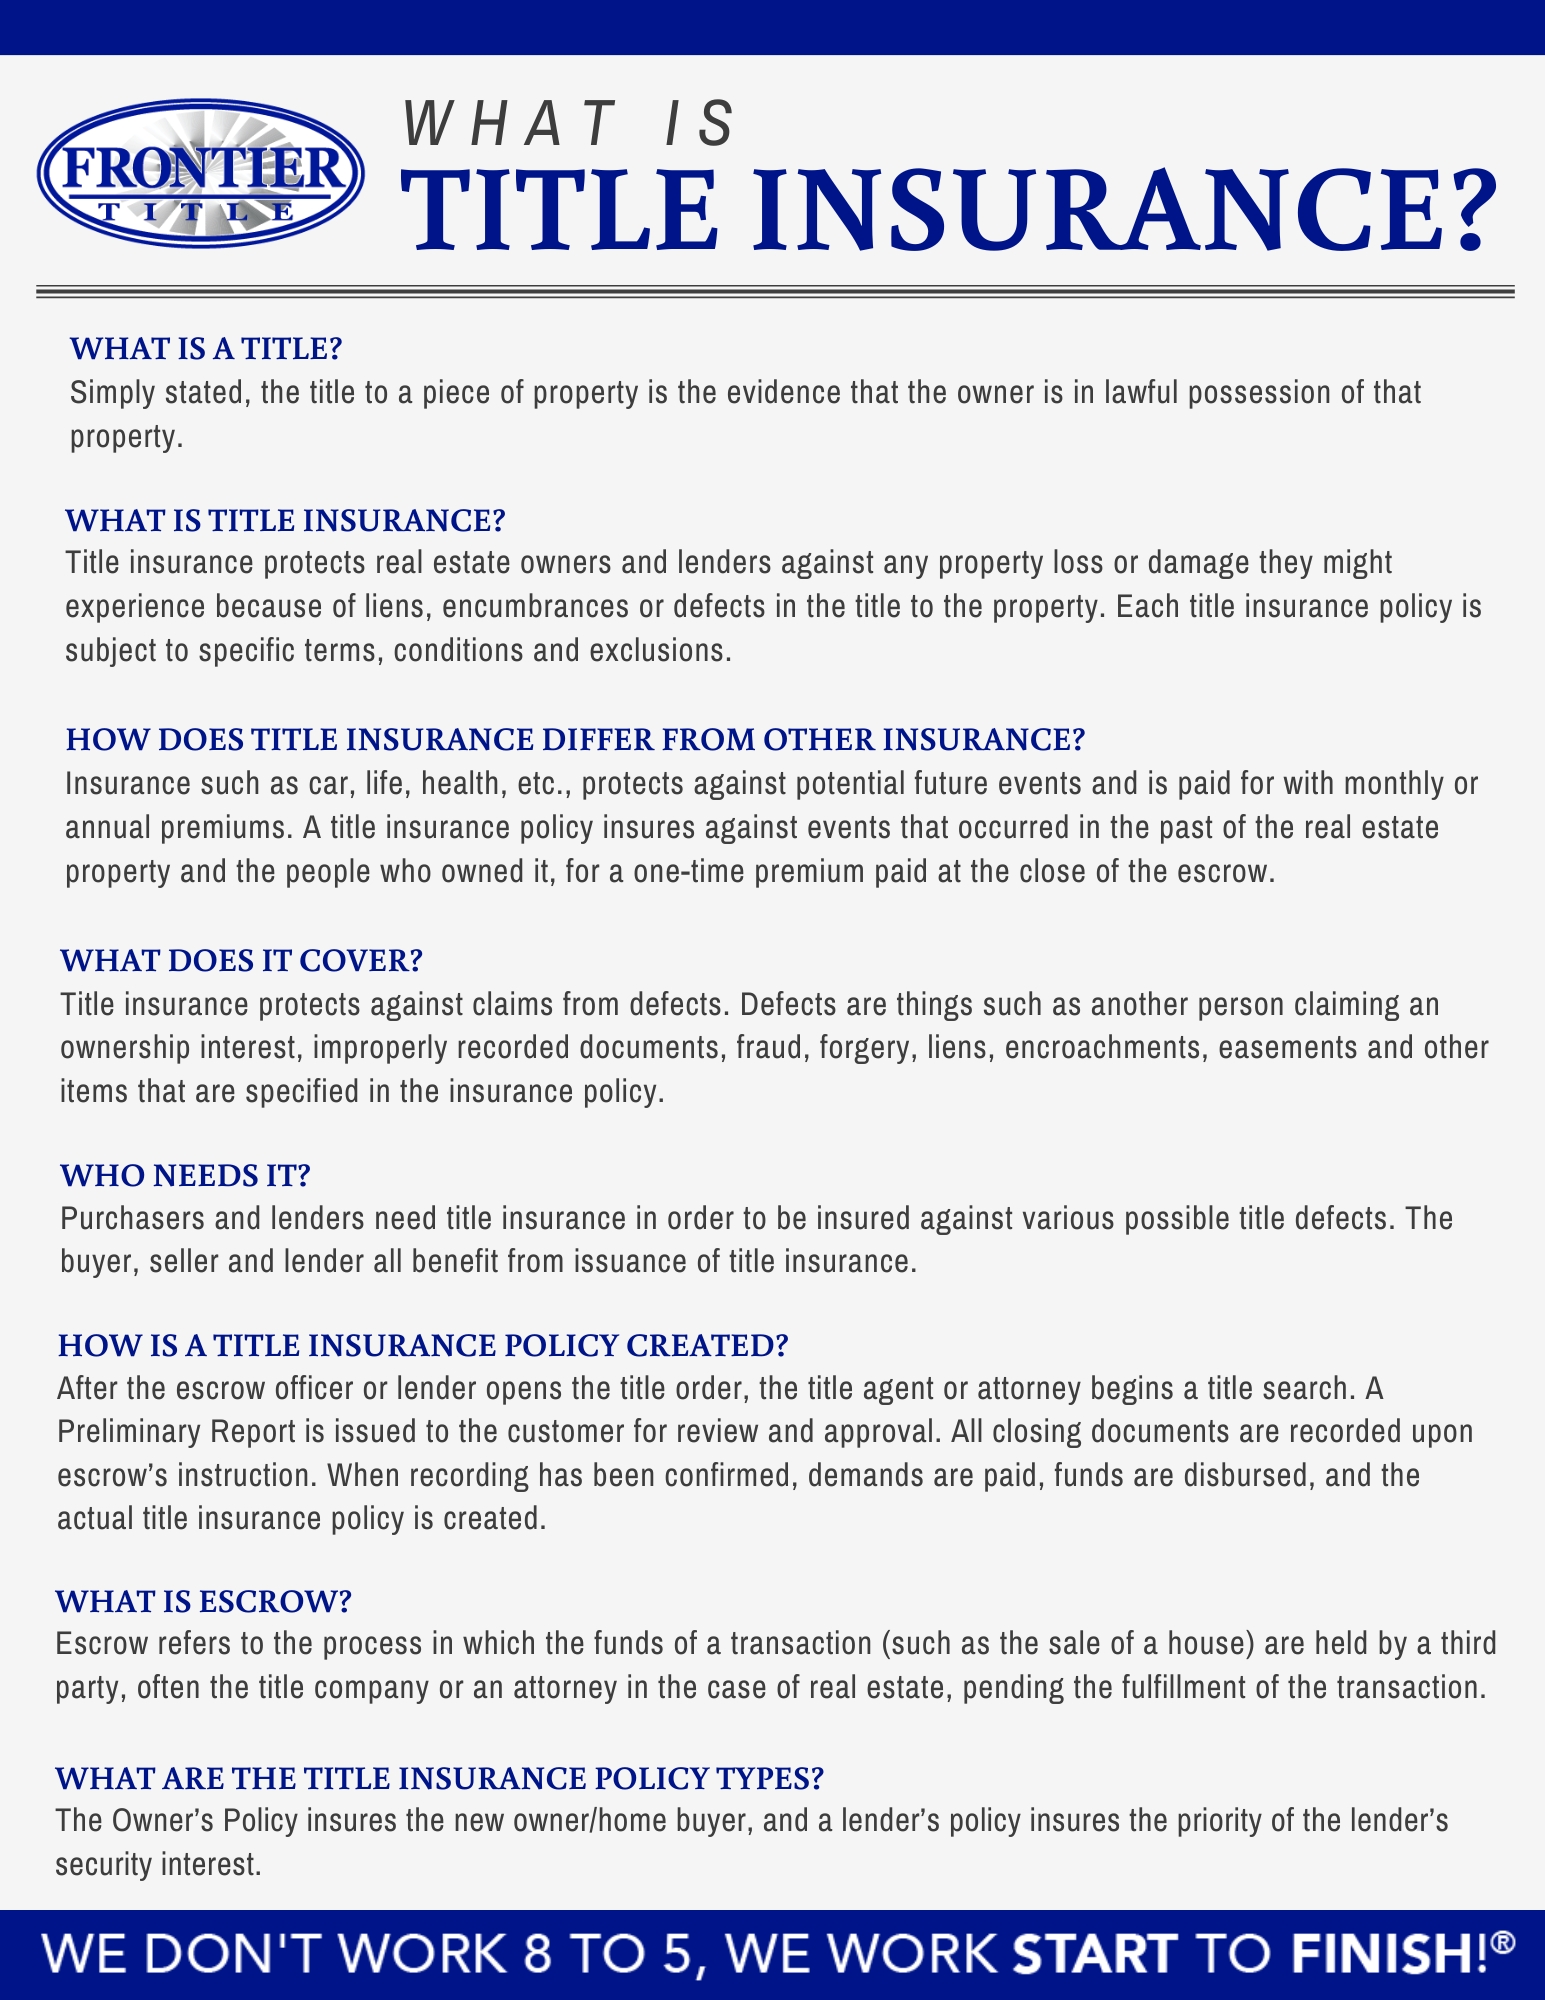 Frontier Title - What is Title Insurance